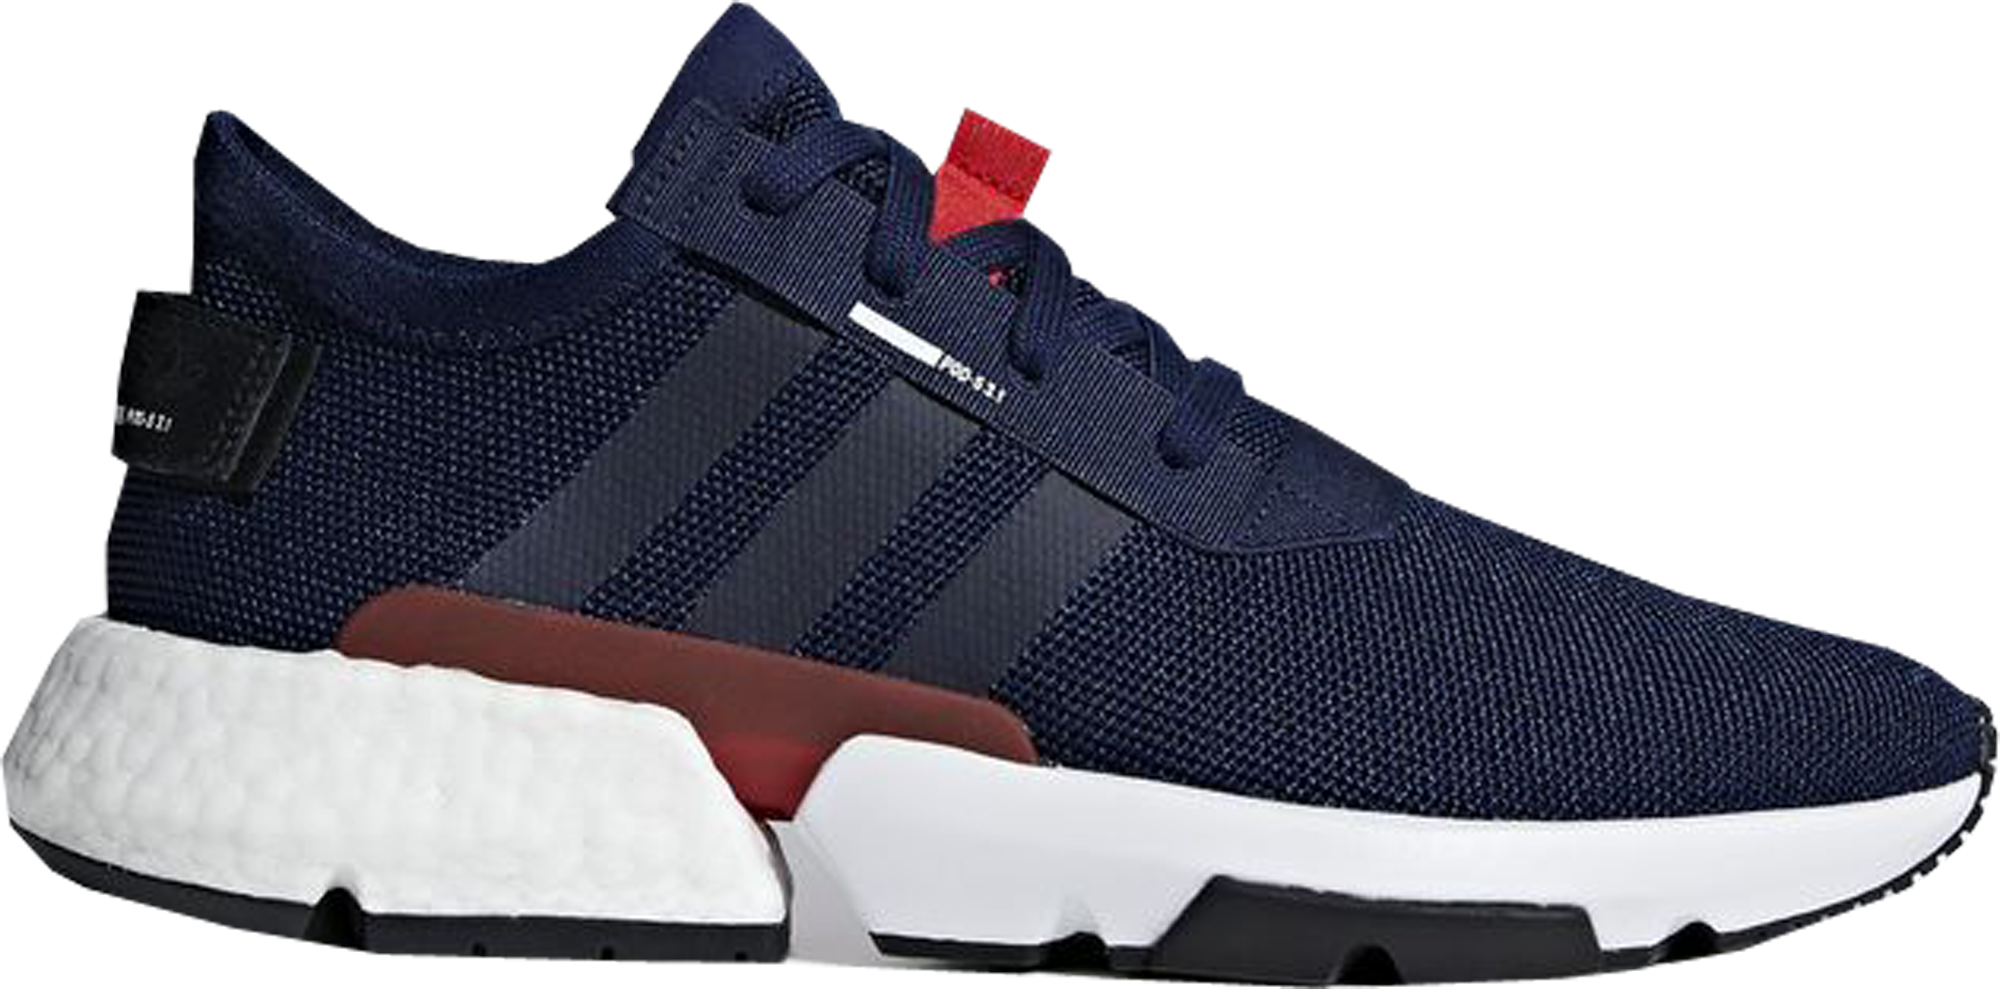 adidas pods red